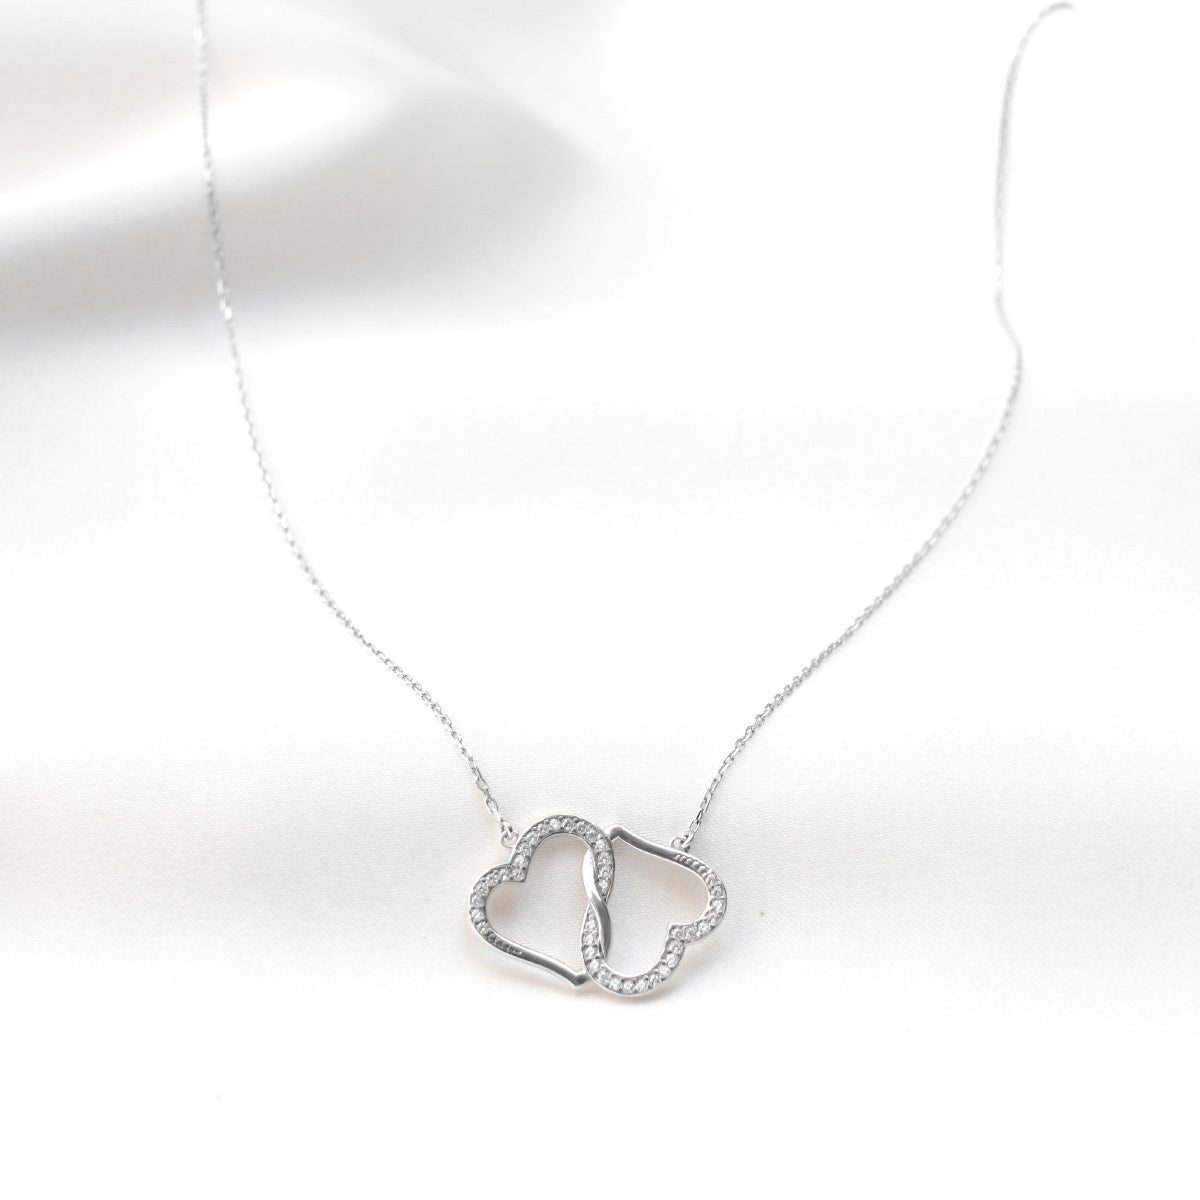 To My Snow Princess - Joined Hearts Silver Necklace Gift Set